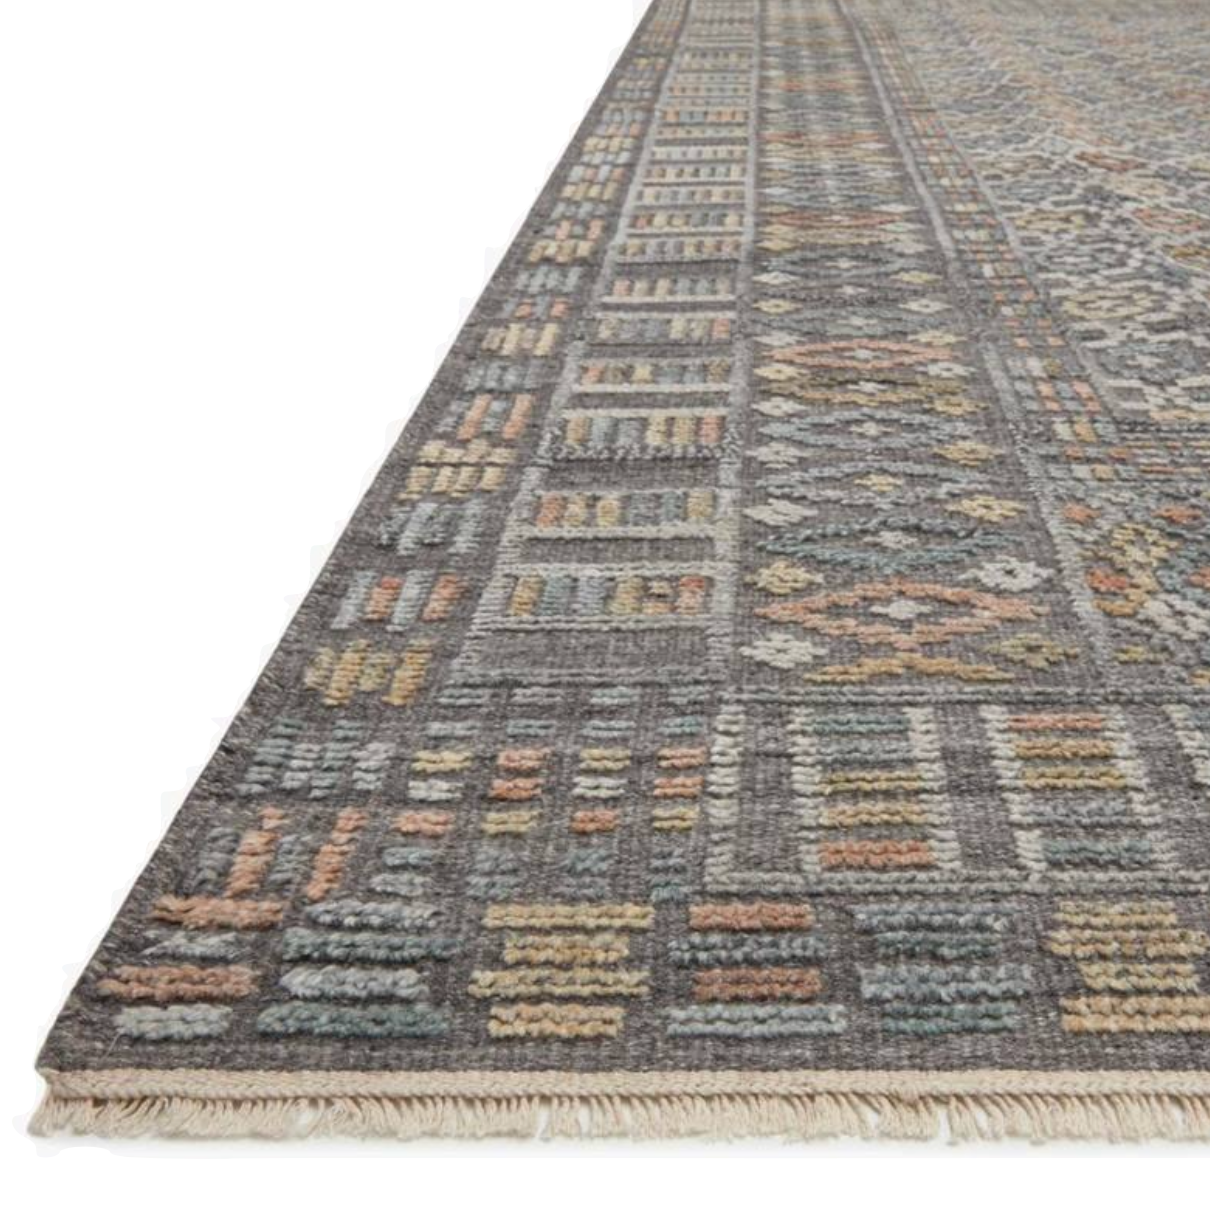 Timeless yet modern, the Nola Charcoal / Multi Area Rug is hand-knotted in India of viscose, cotton, wool and other fibers. The tonal collection showcases an elevated texture, accentuating the pattern in every piece.  Hand Knotted 66% Viscose | 25% Wool | 7% Cotton | 2% Other Fiber Pile NOL-03 Charcoal / Multi